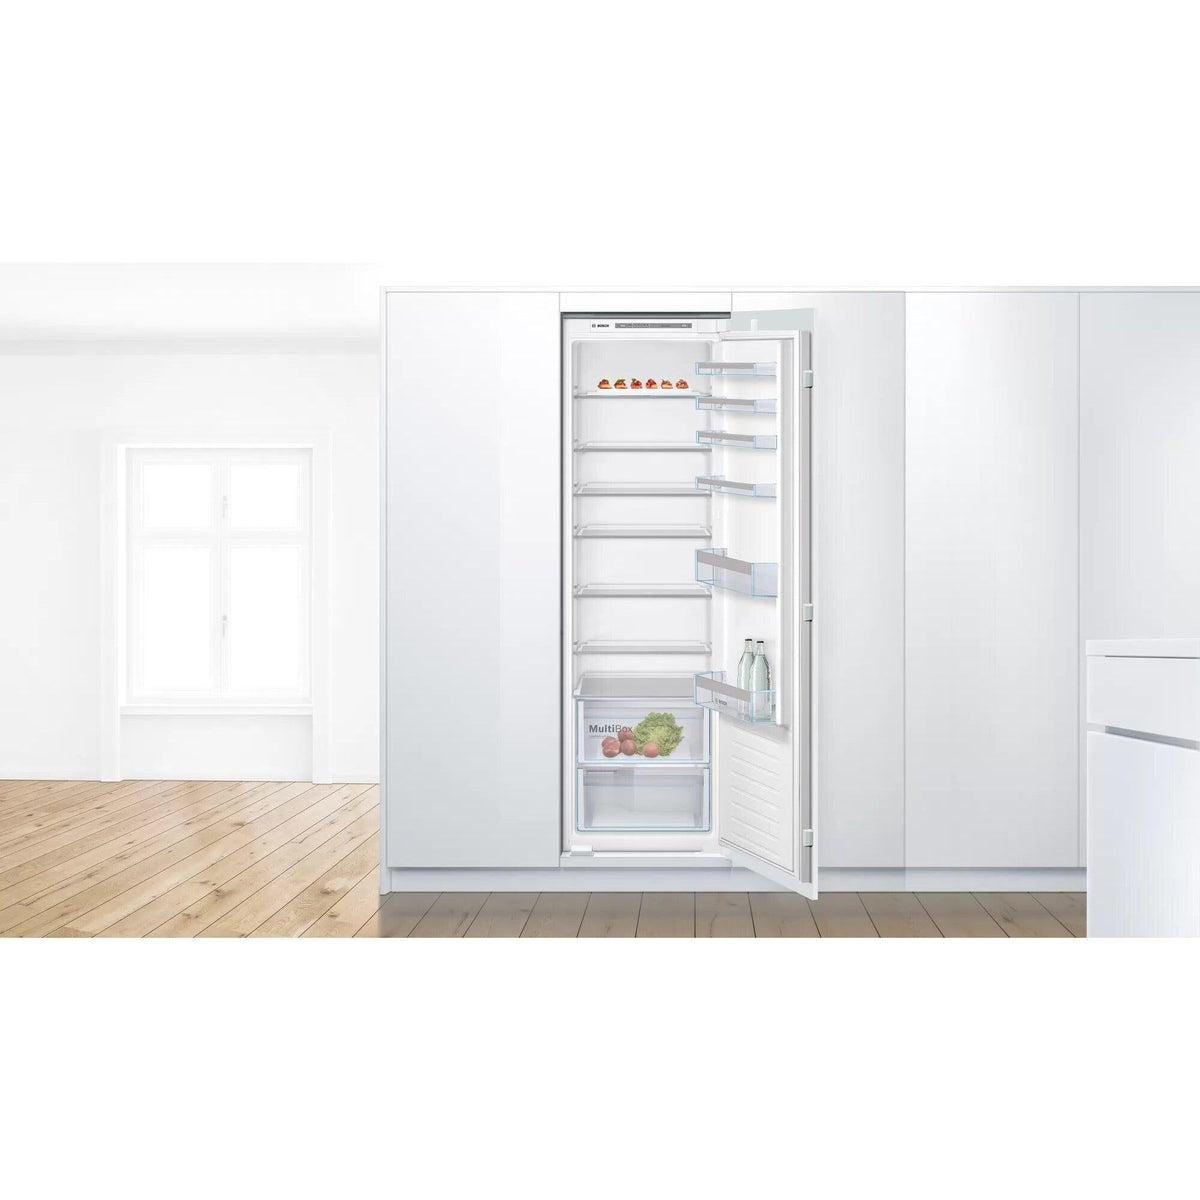 Bosch Serie 4 319L Built-In Fridge - White | KIR81VSF0G from DID Electrical - guaranteed Irish, guaranteed quality service. (6977573716156)